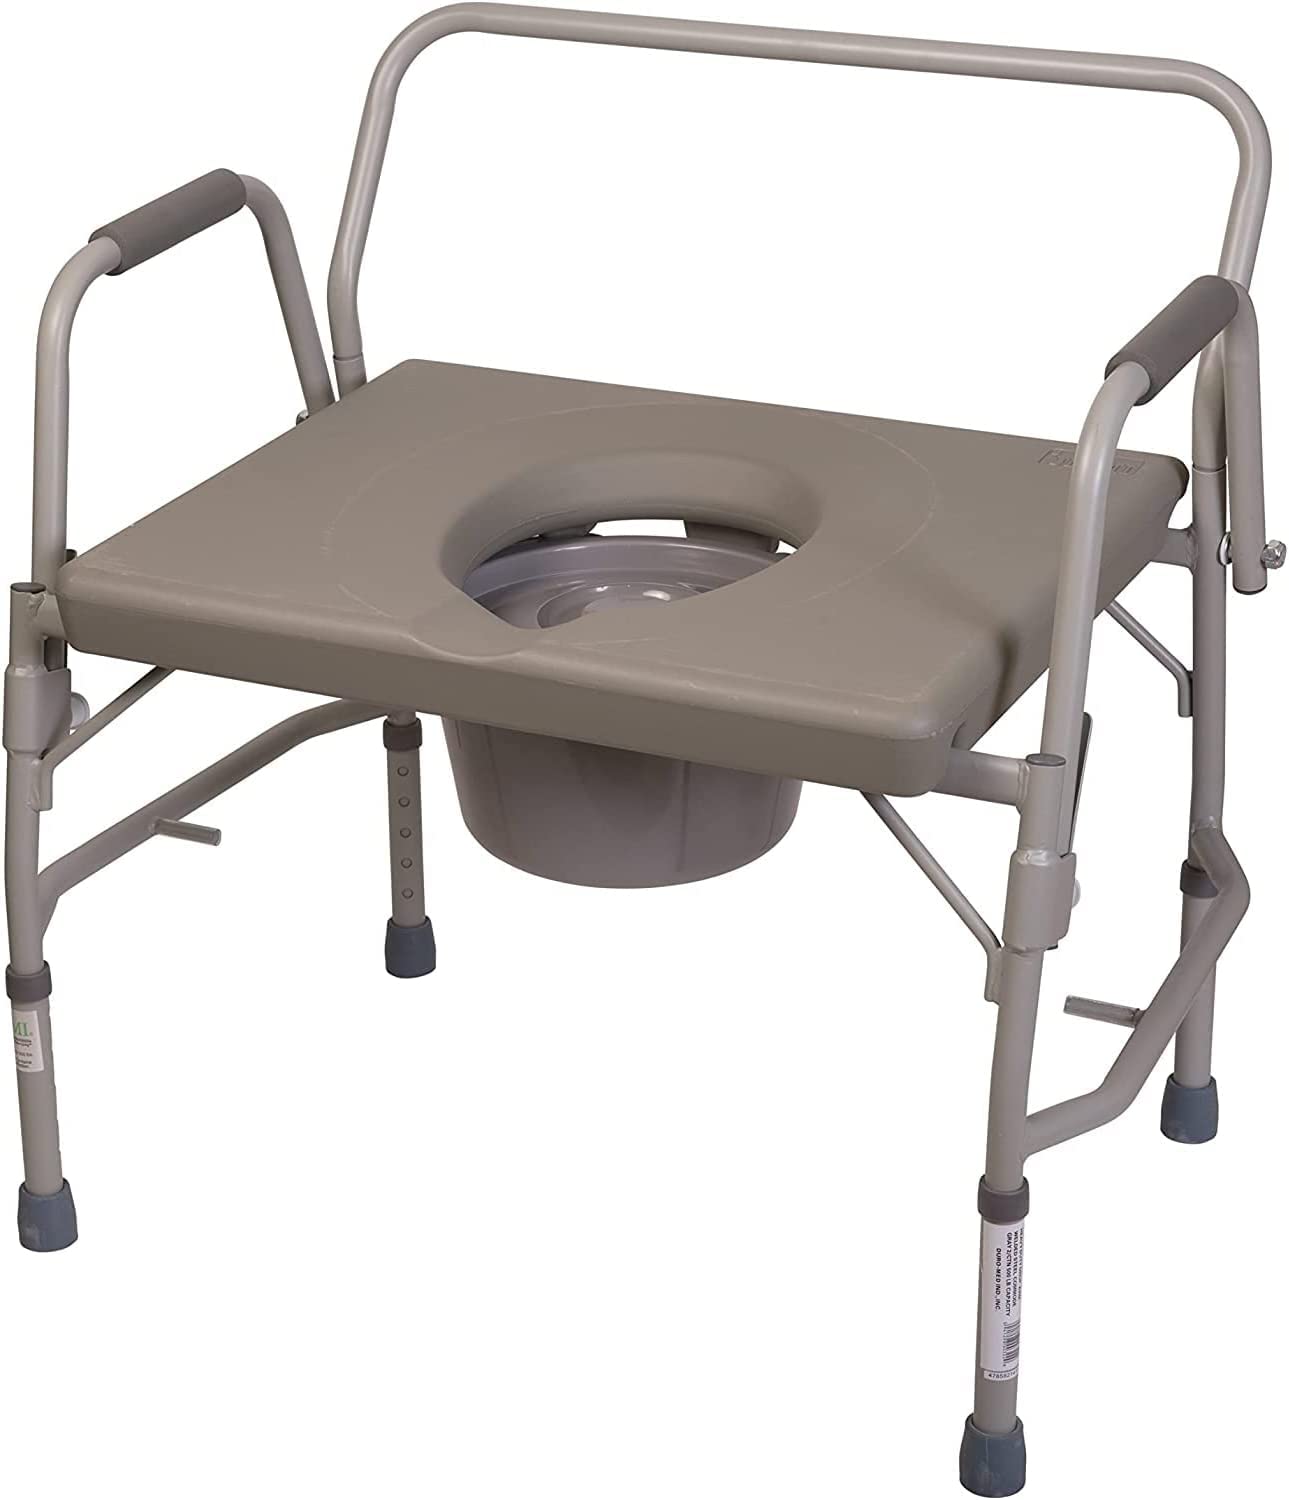 DMI Bedside Commode, Extra Wide Commode Chair, Bedside Toilet, Raised Toilet Seat with Handles, Holds up to 500 Pounds with Included 7 qt Commode Bucket, Adjustable from 19-23 Inches